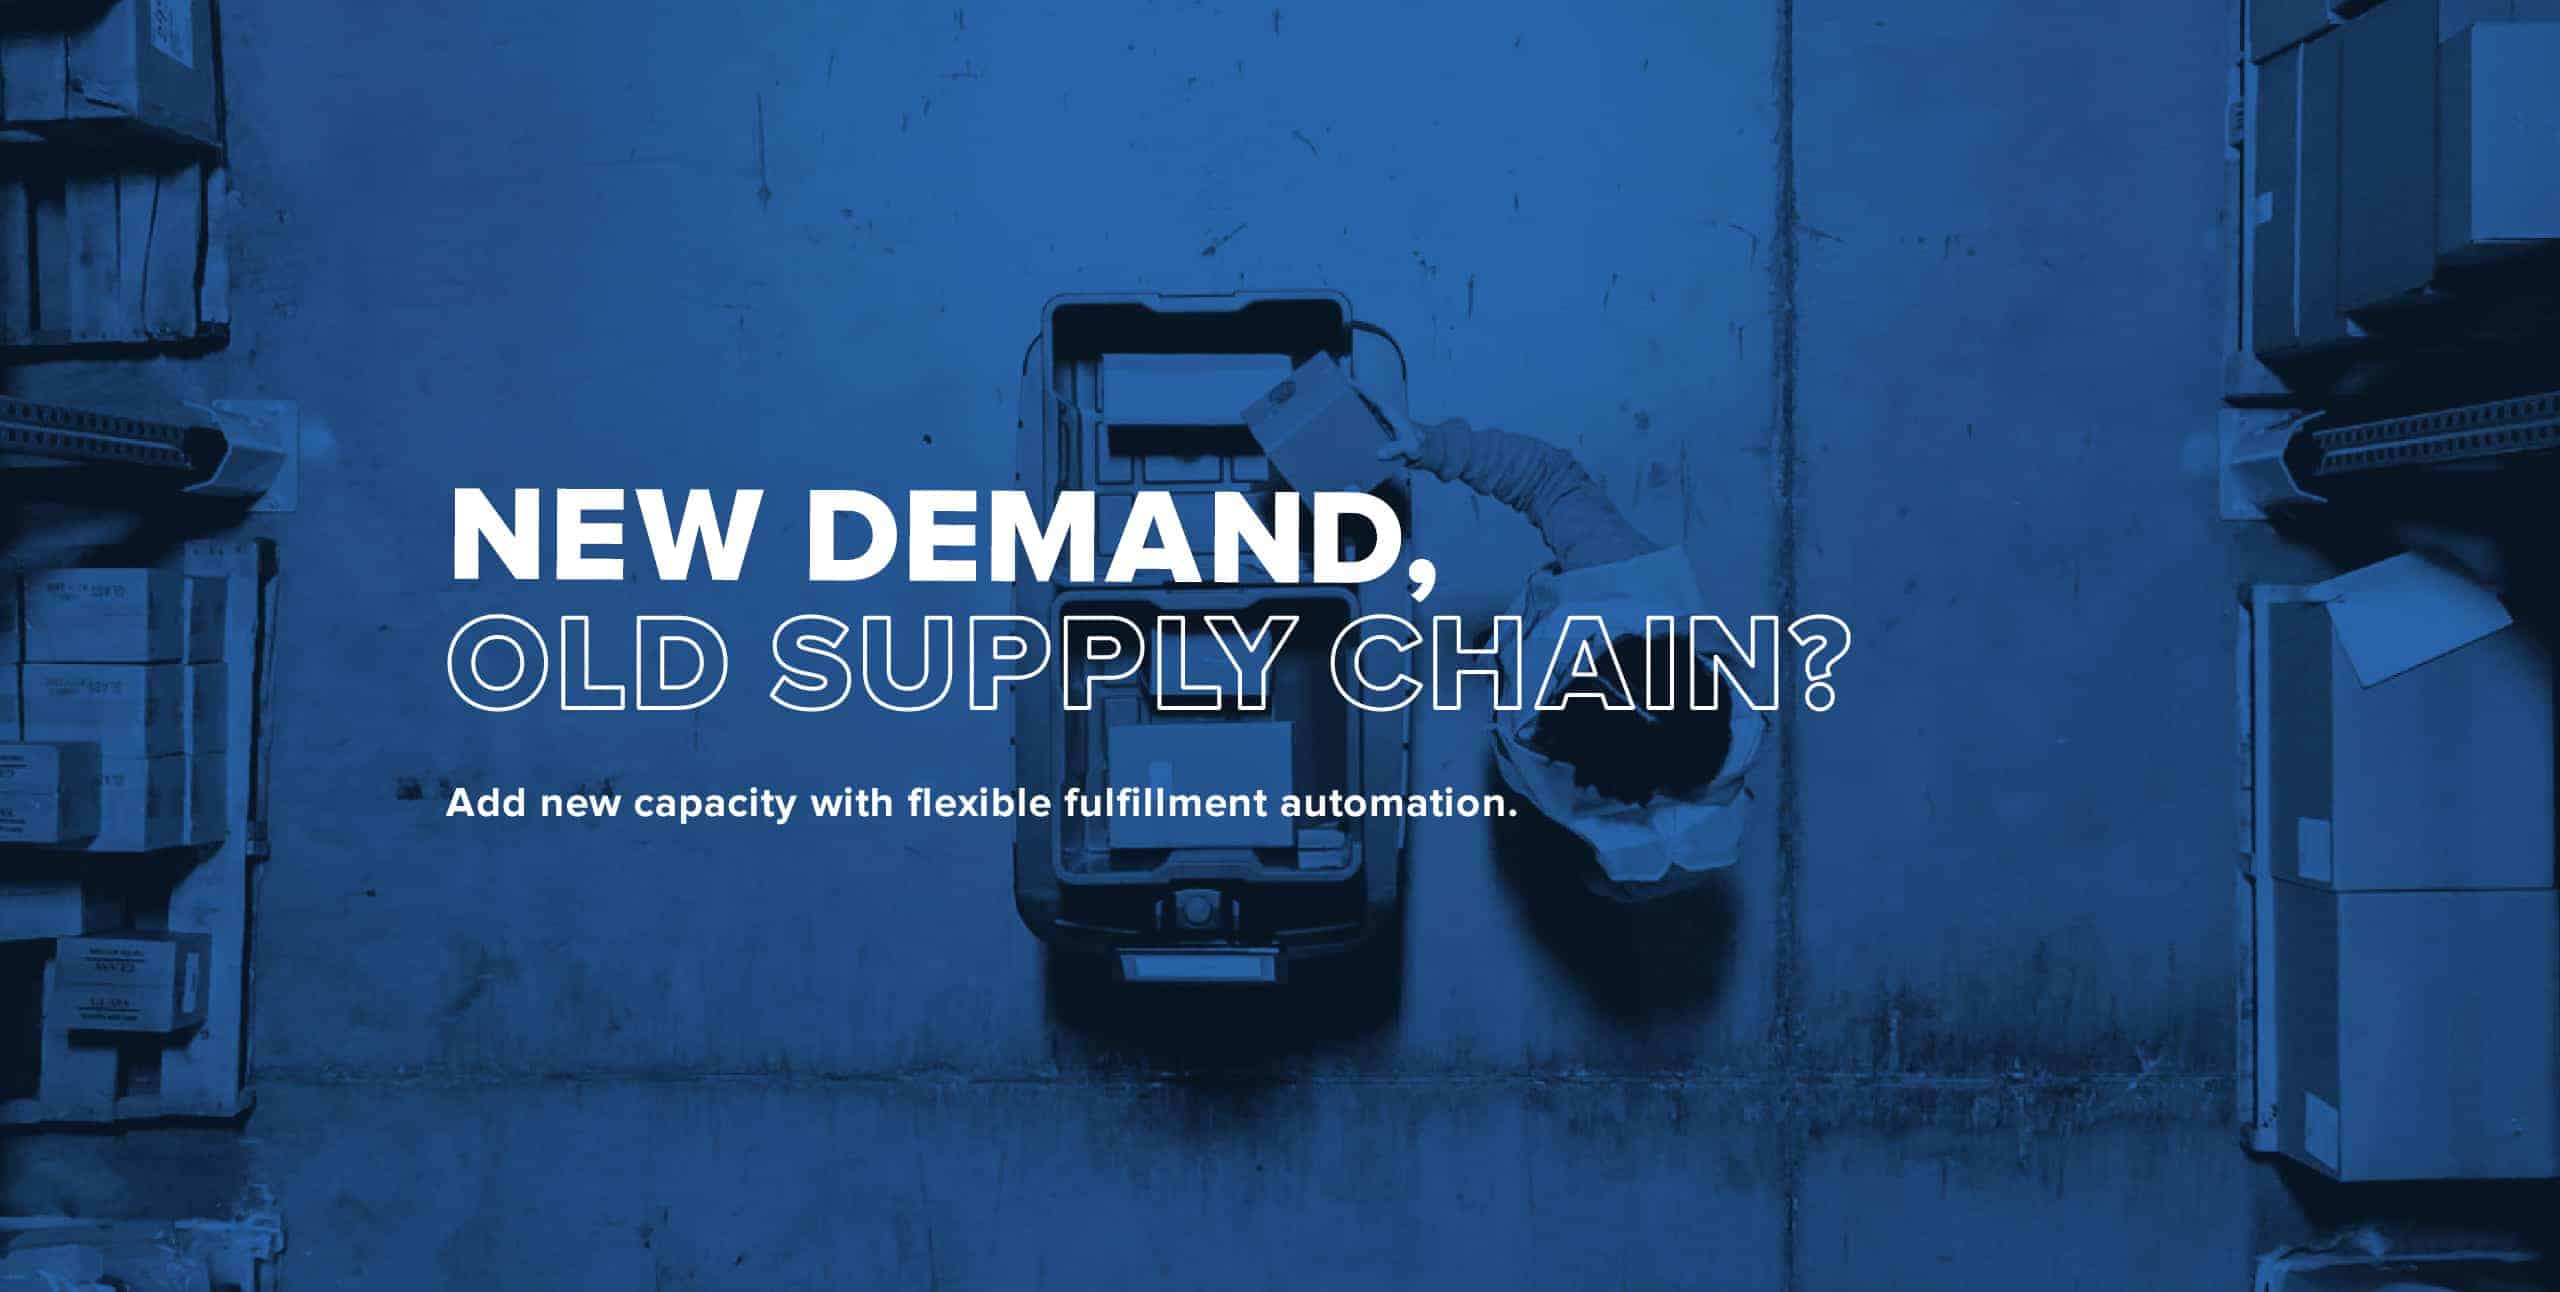 New Demand, Old Supply Chain? Add New Capacity with Automation